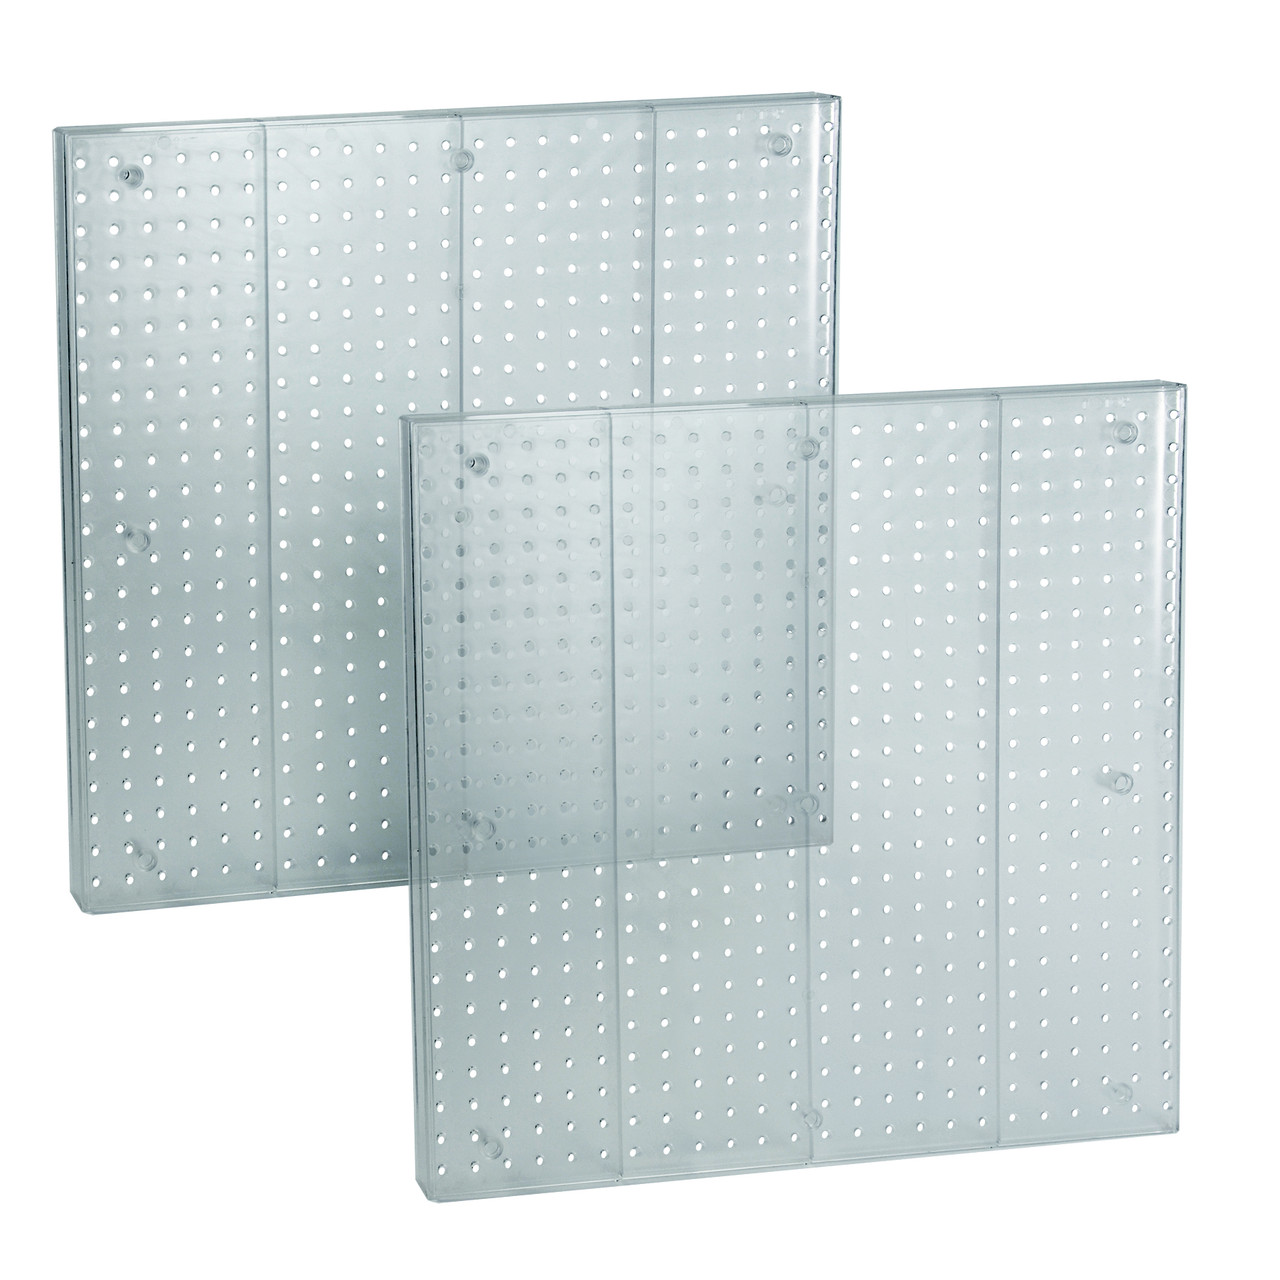 Molded 12-Cup Display Tray, Pegboard Accessory